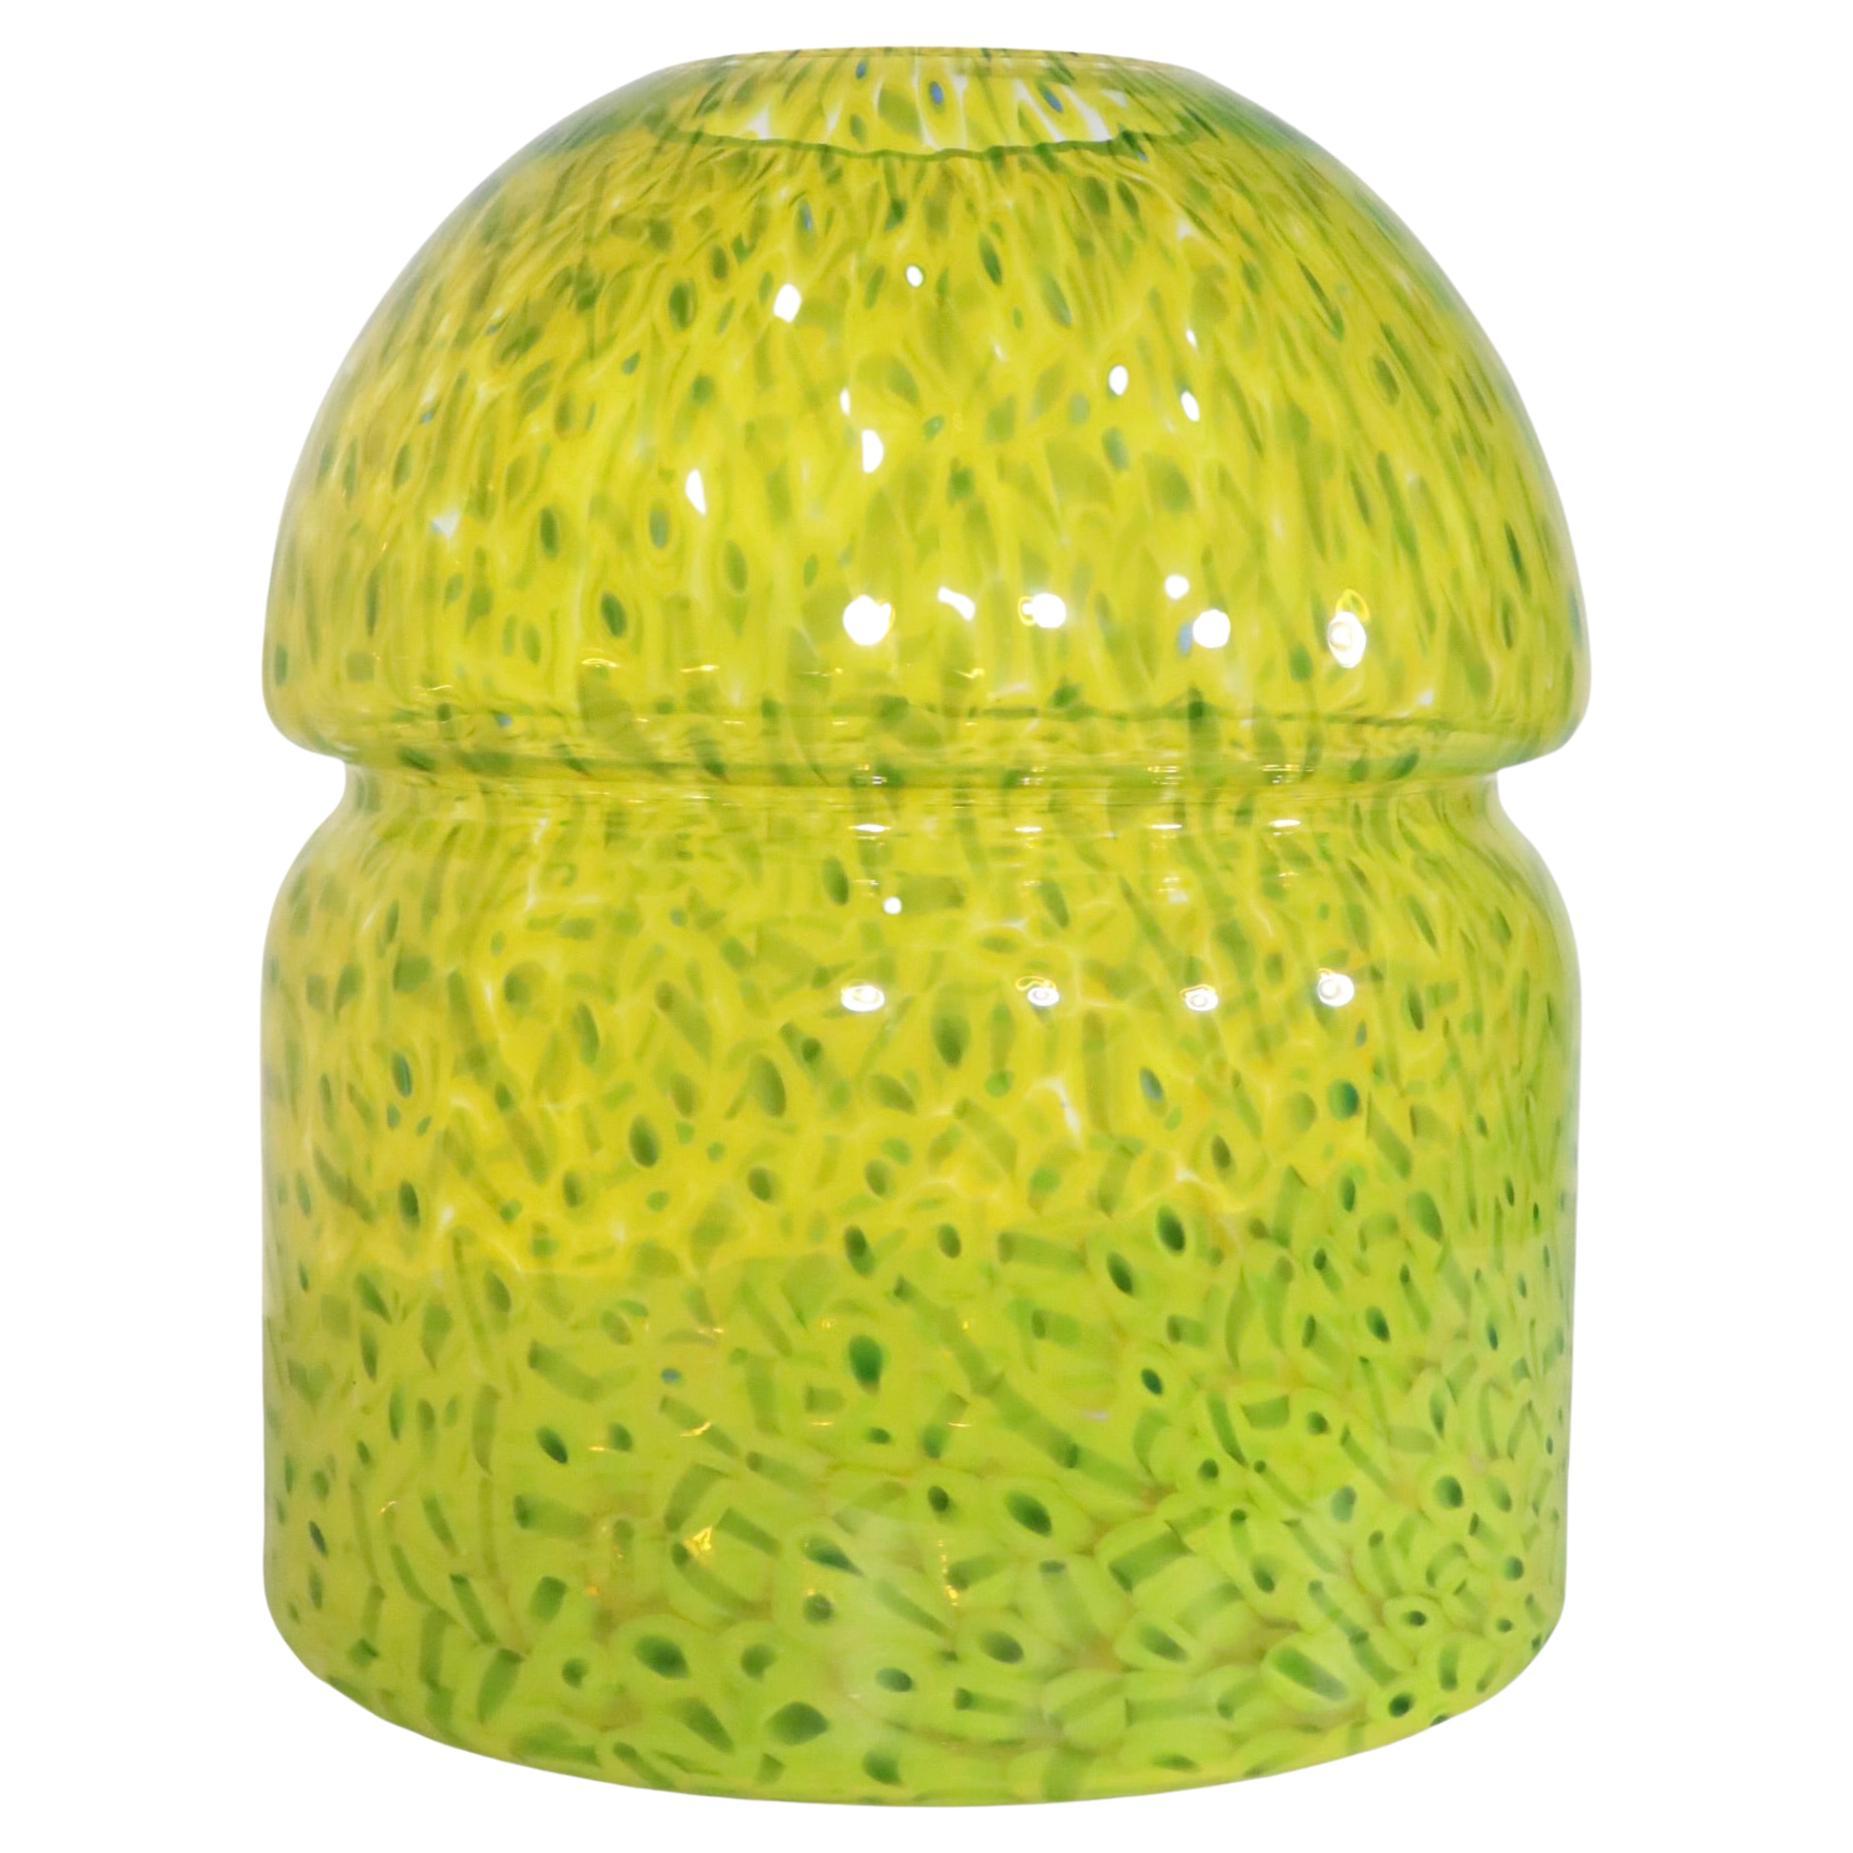 Spectacular Murano Glicine  vase designed by Gae Aulenti for Vistosi, circa 1980's. 
 The vase was executed in polychrome green tones, the base is round, with a domed top.
 This example is in excellent , original, undamaged condition.
 Total H 13 x